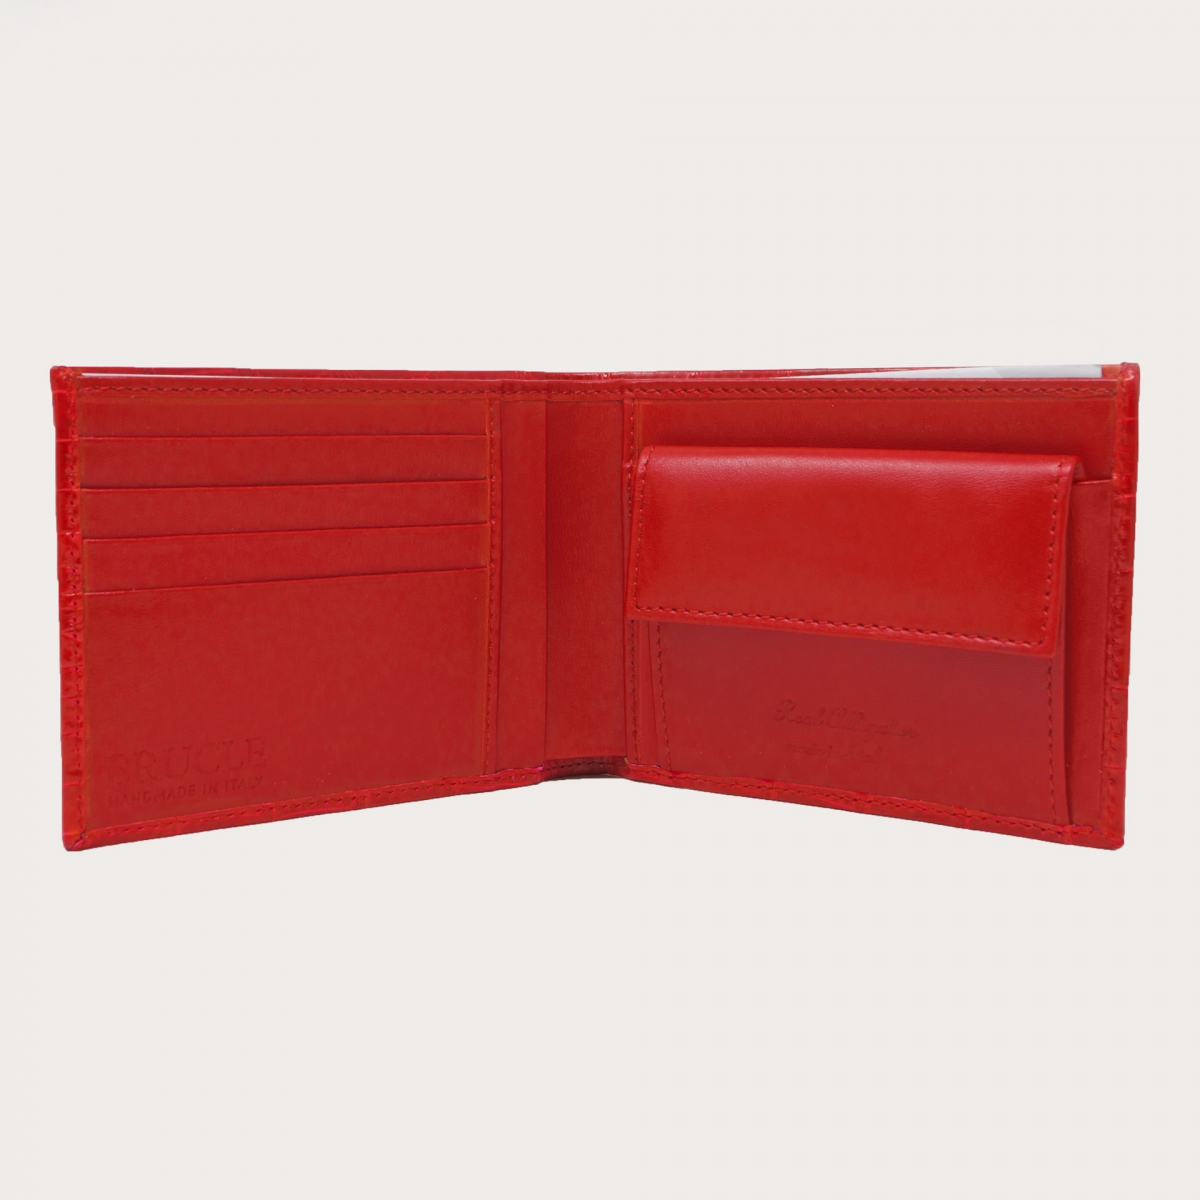 BRUCLE Elegant alligator wallet with coin purse, red